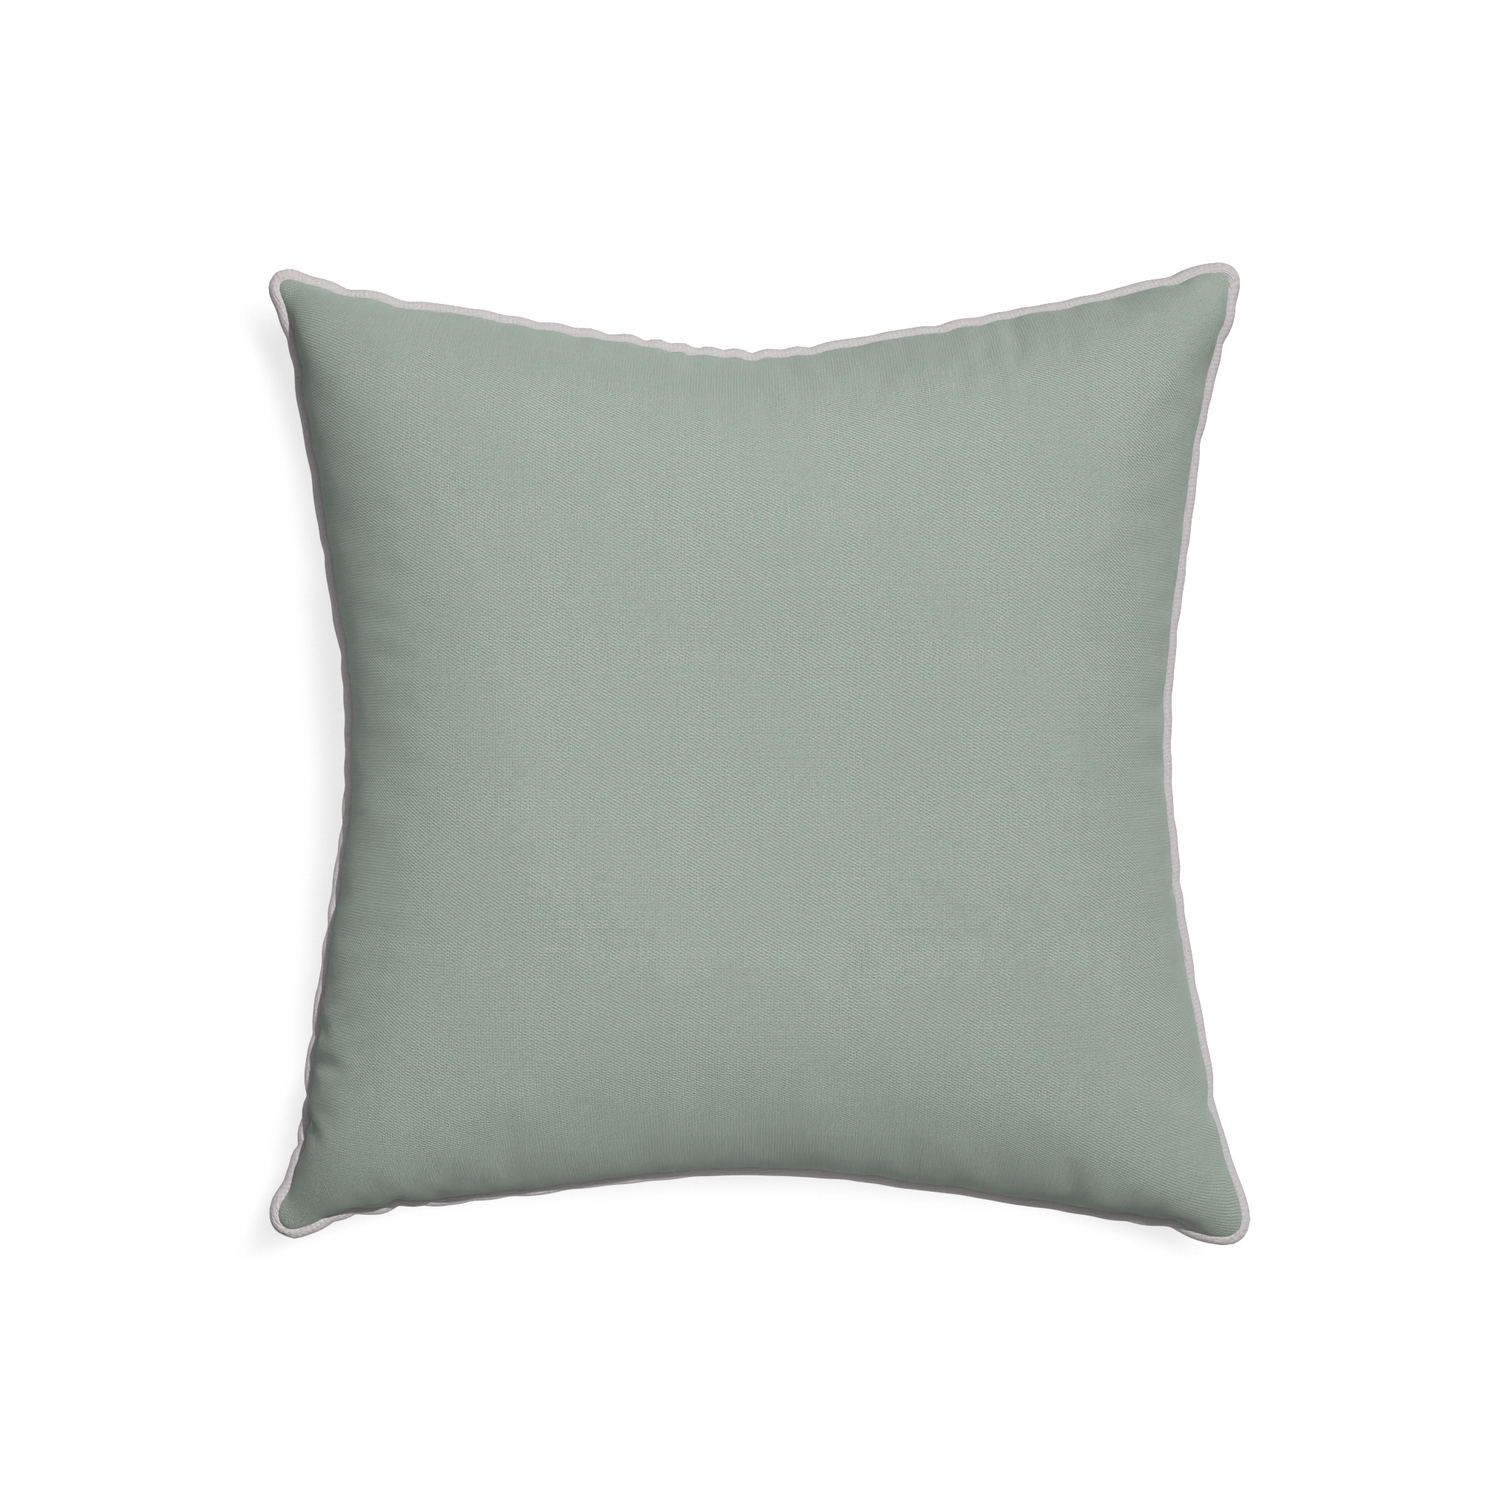 22-square sage custom pillow with pebble piping on white background